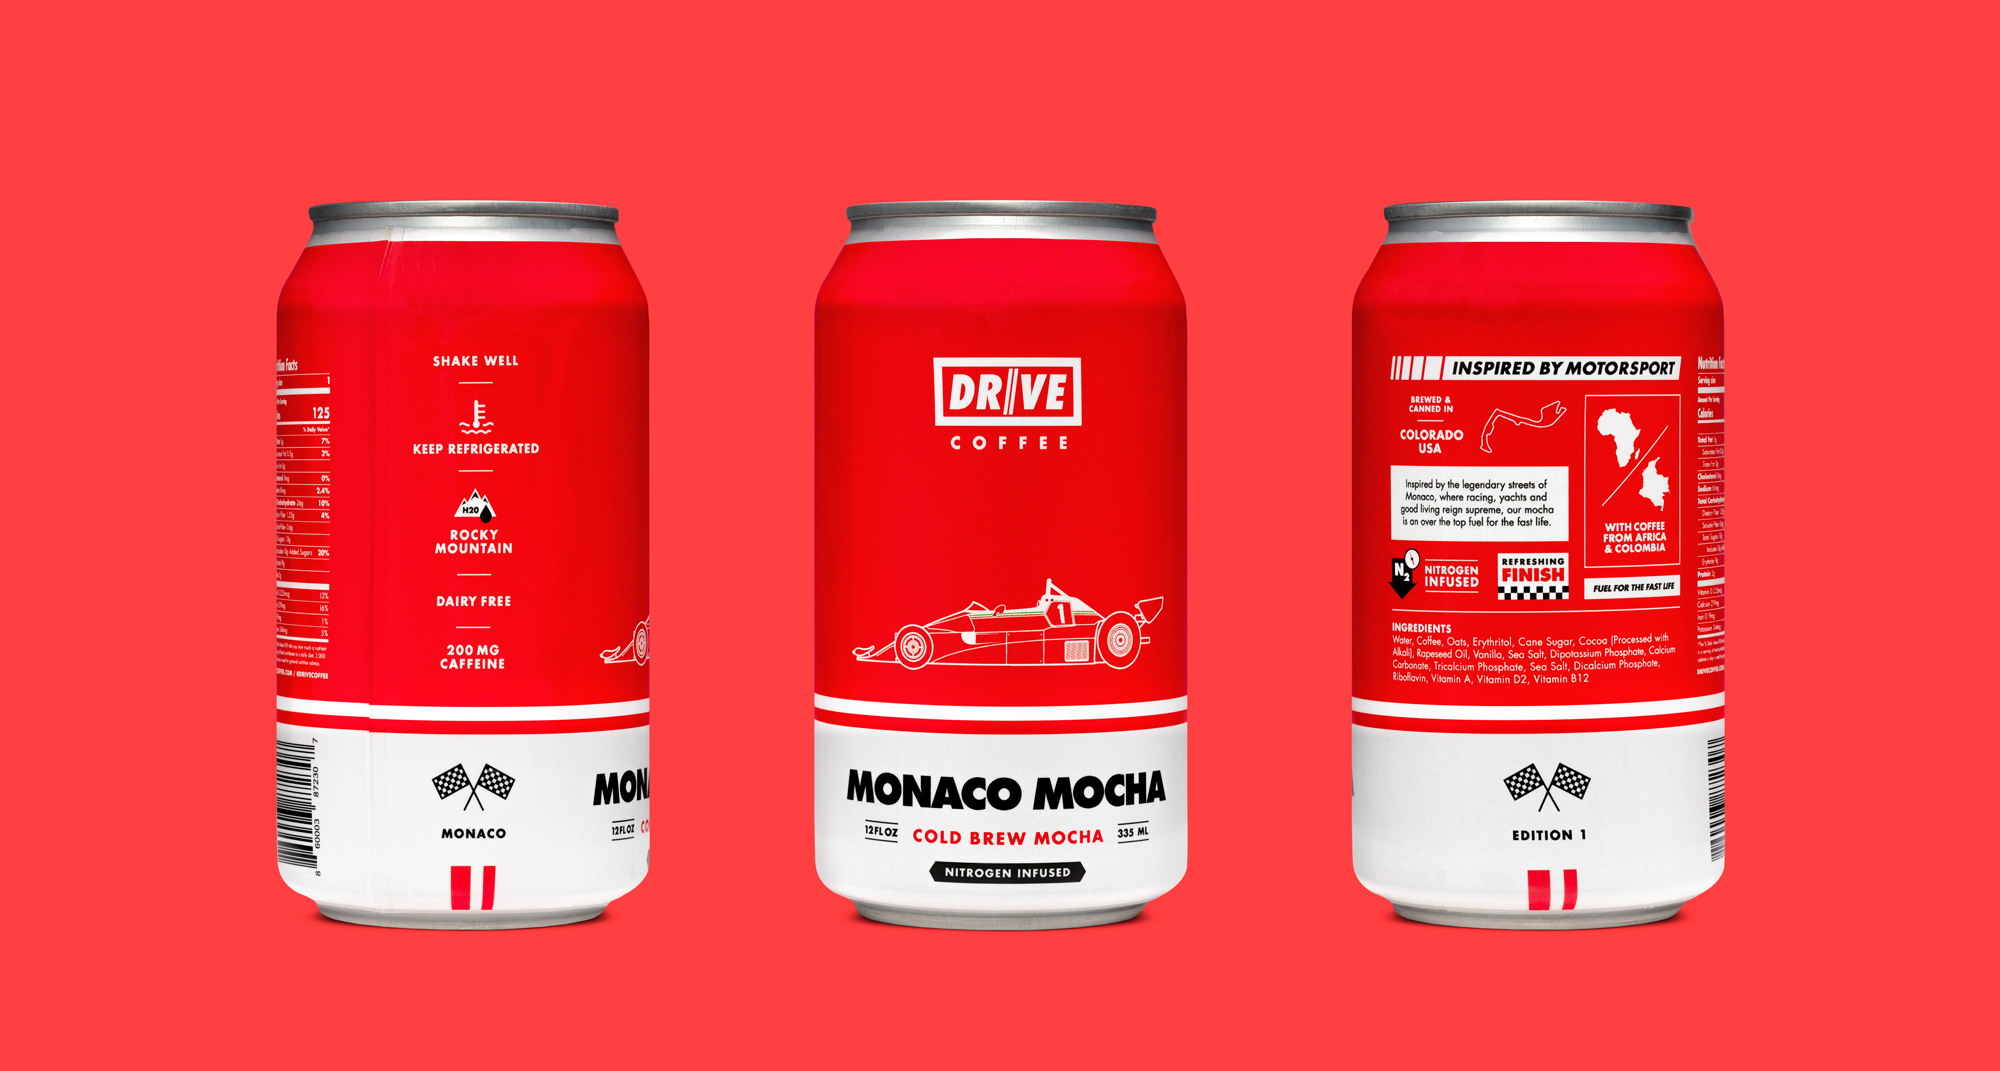 3 views of Drive Coffee's Monaco Mocha cold brew can label on a red background